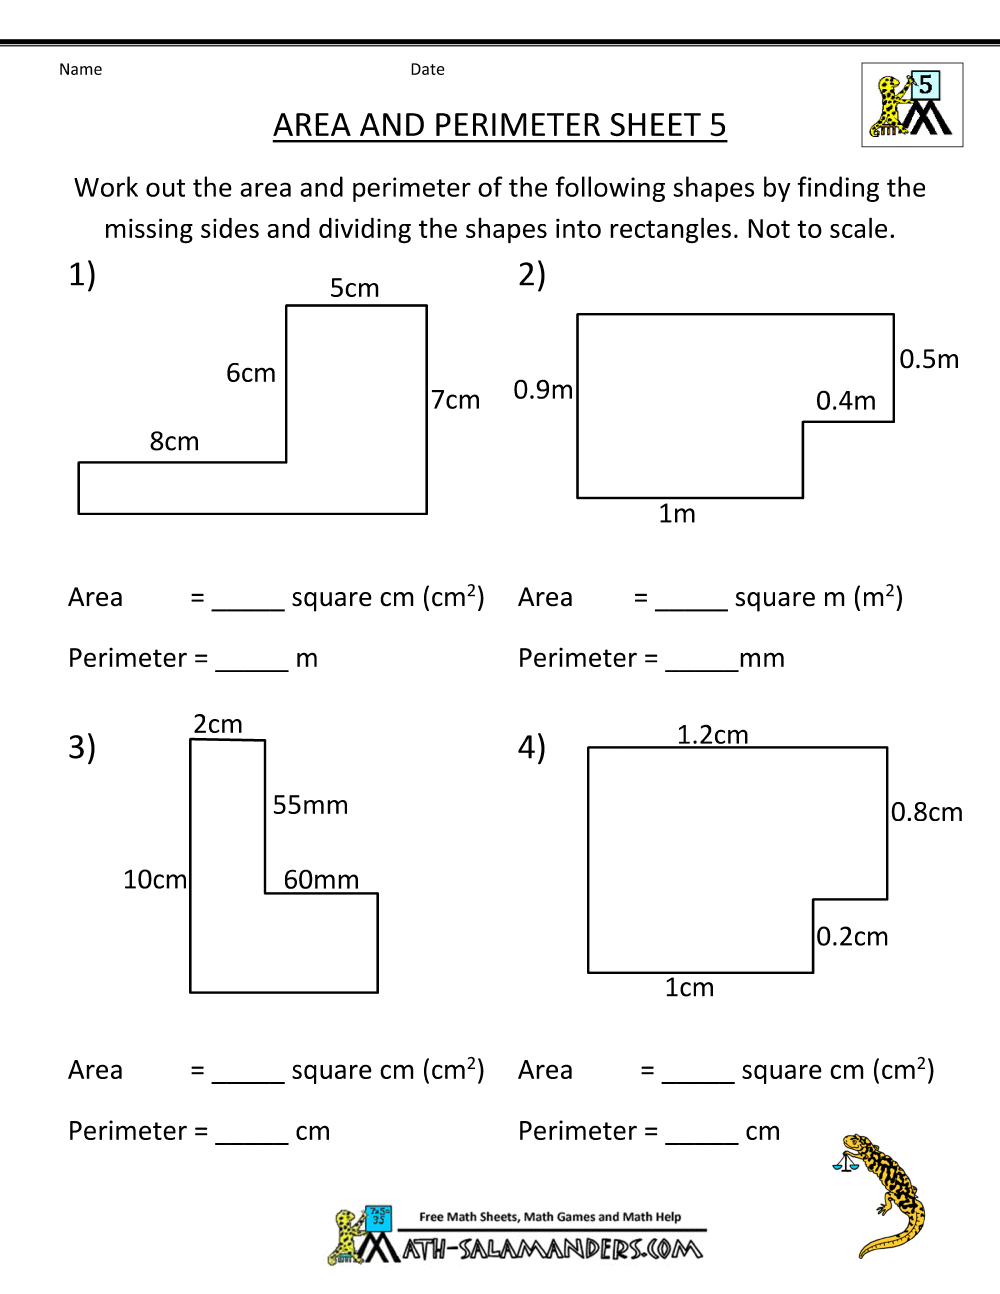 Math Worksheets For Area Perimeter And Volume 546446